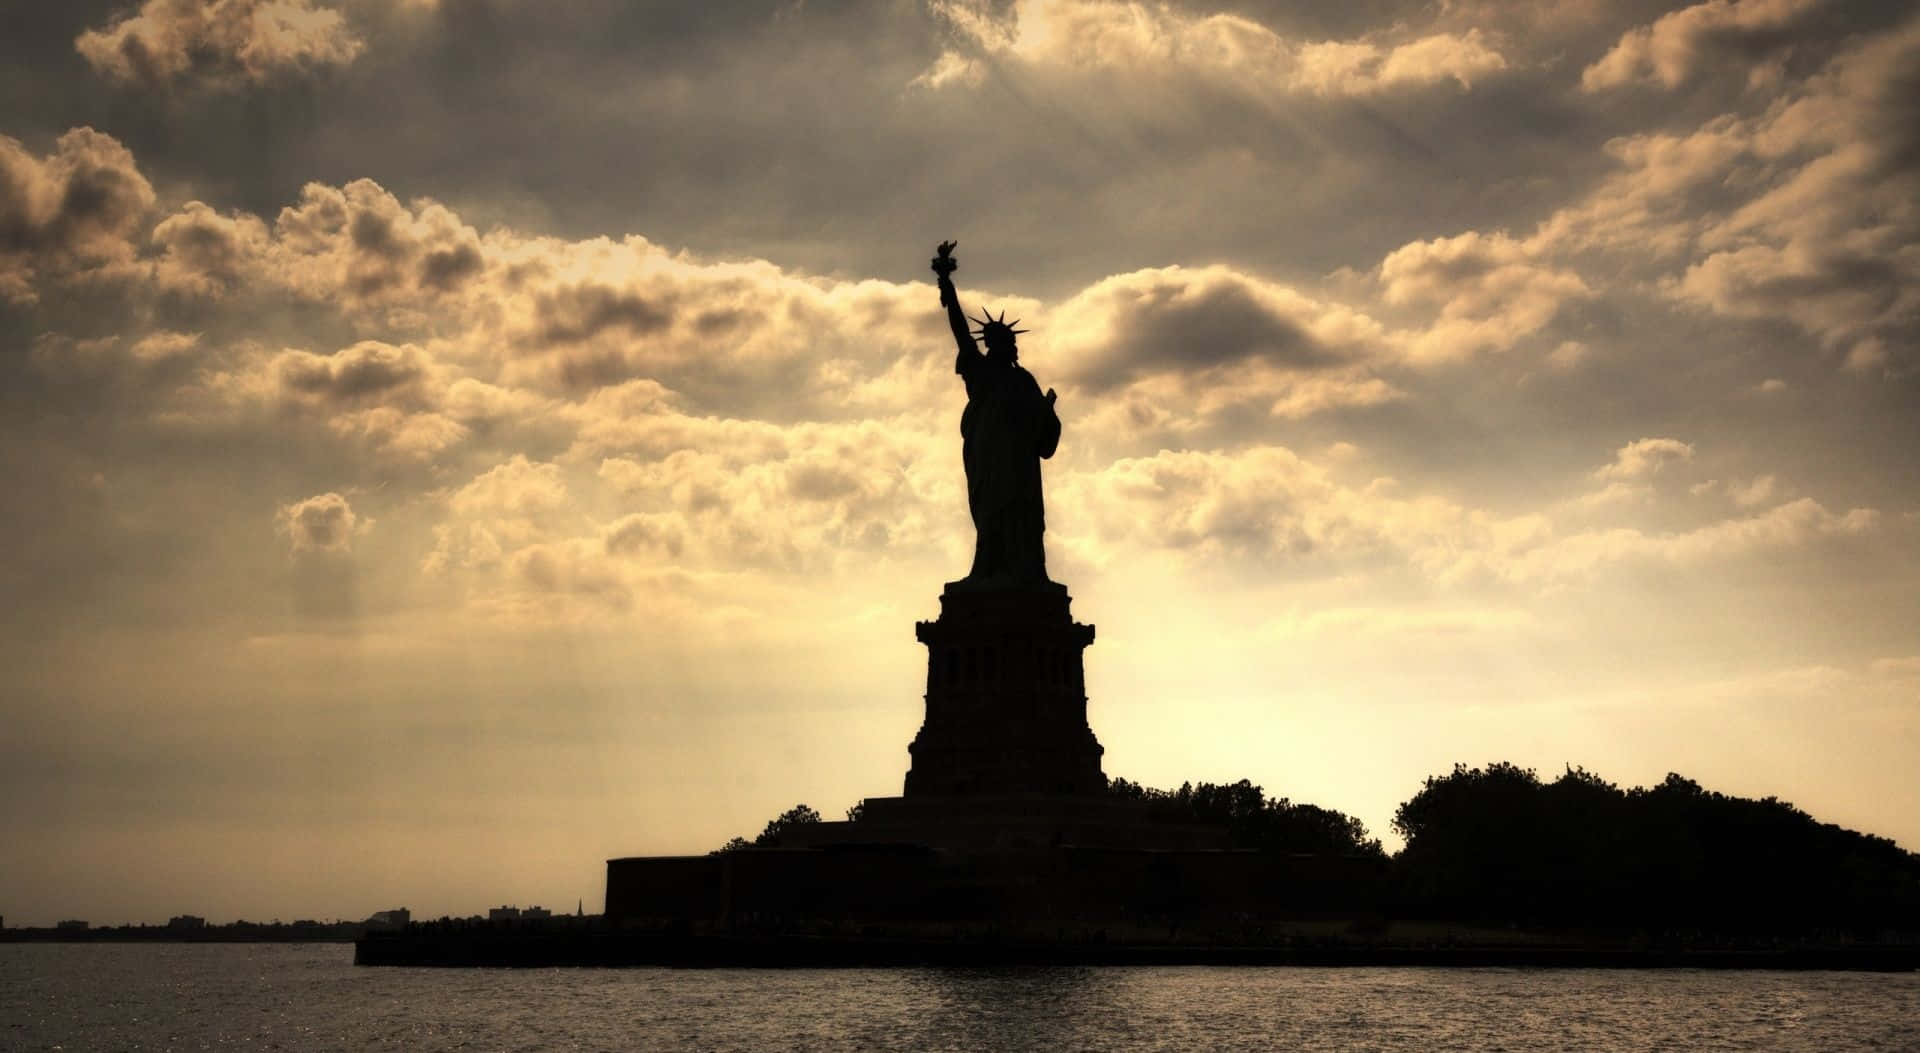 The Statue Of Liberty Is Silhouetted Against The Sky Wallpaper